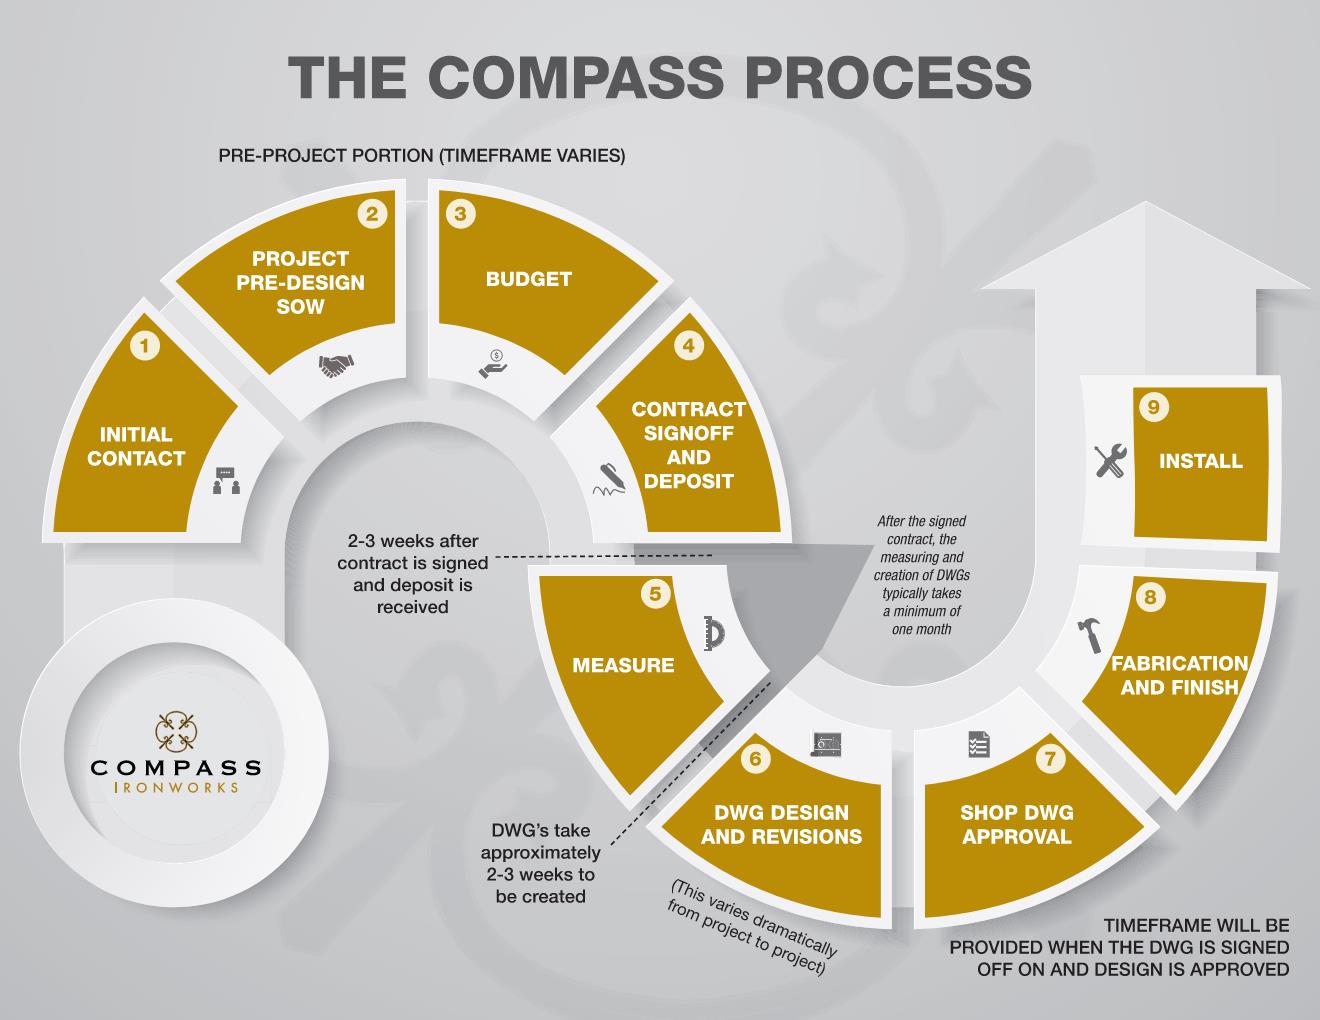 The COMPASS Process Page 001